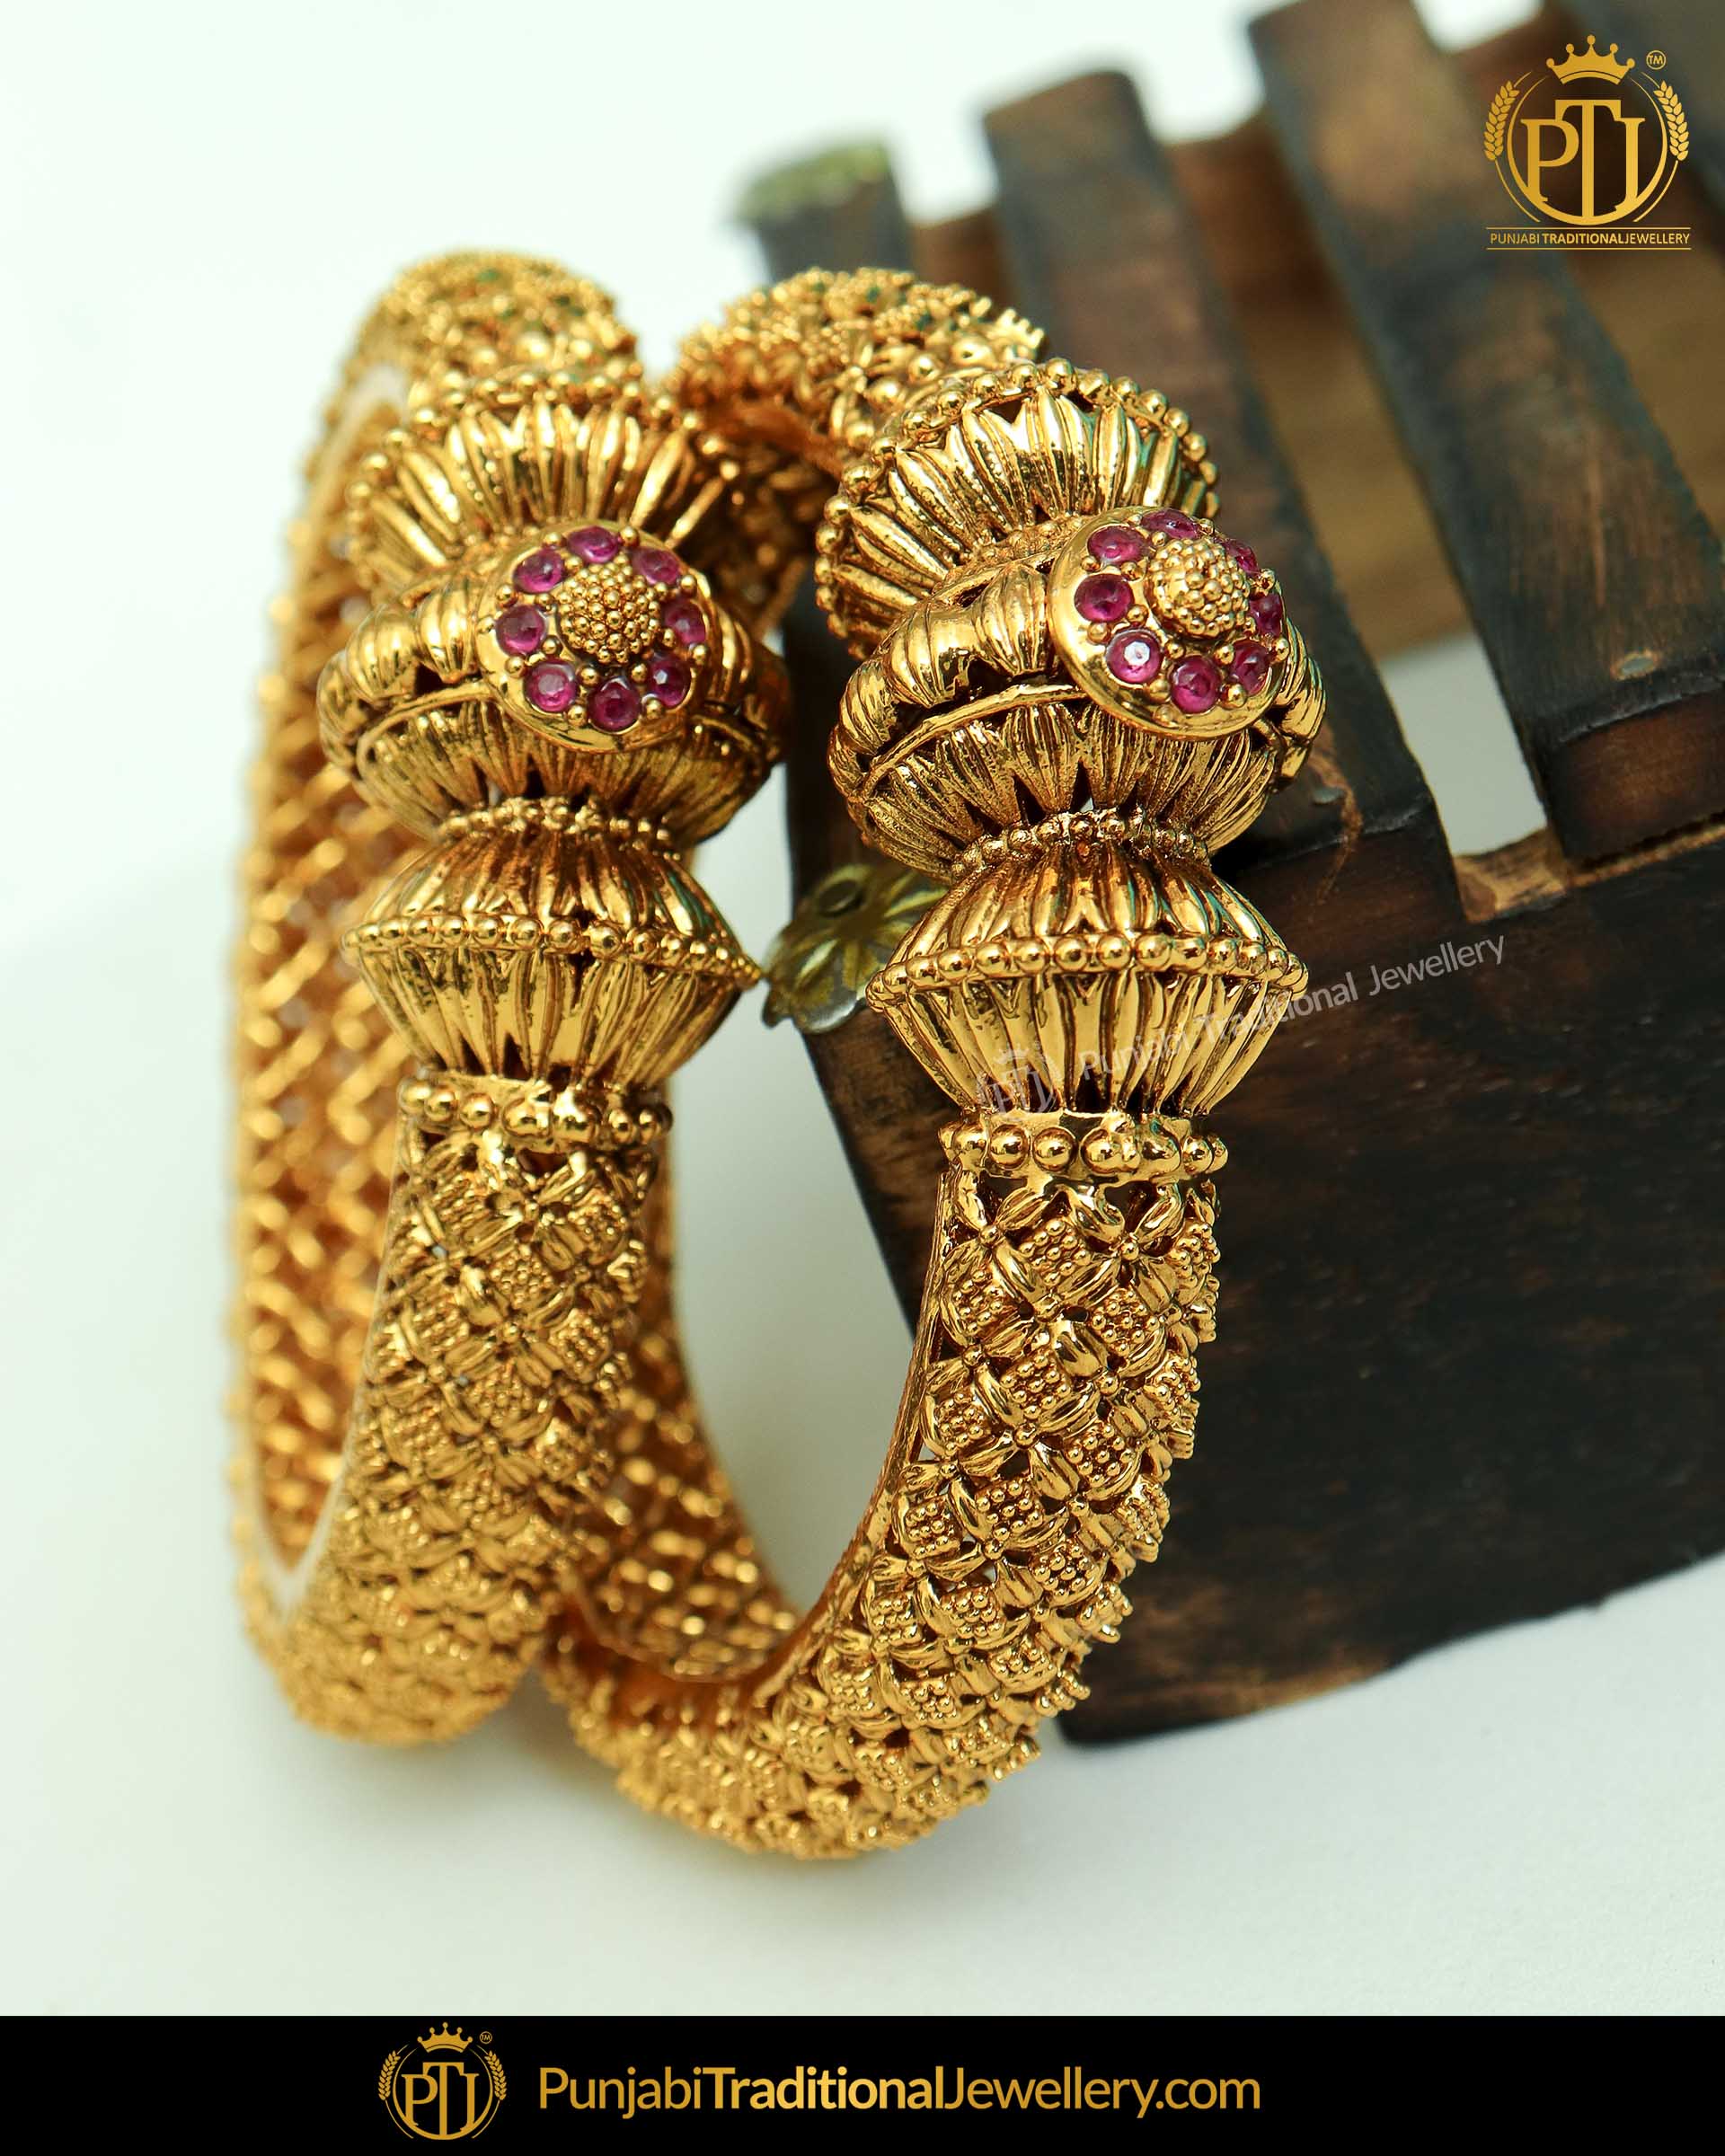 Antique Gold Finished Rubby Johda bangles Openable Bangles (Pair) | Punjabi Traditional Jewellery Exclusive